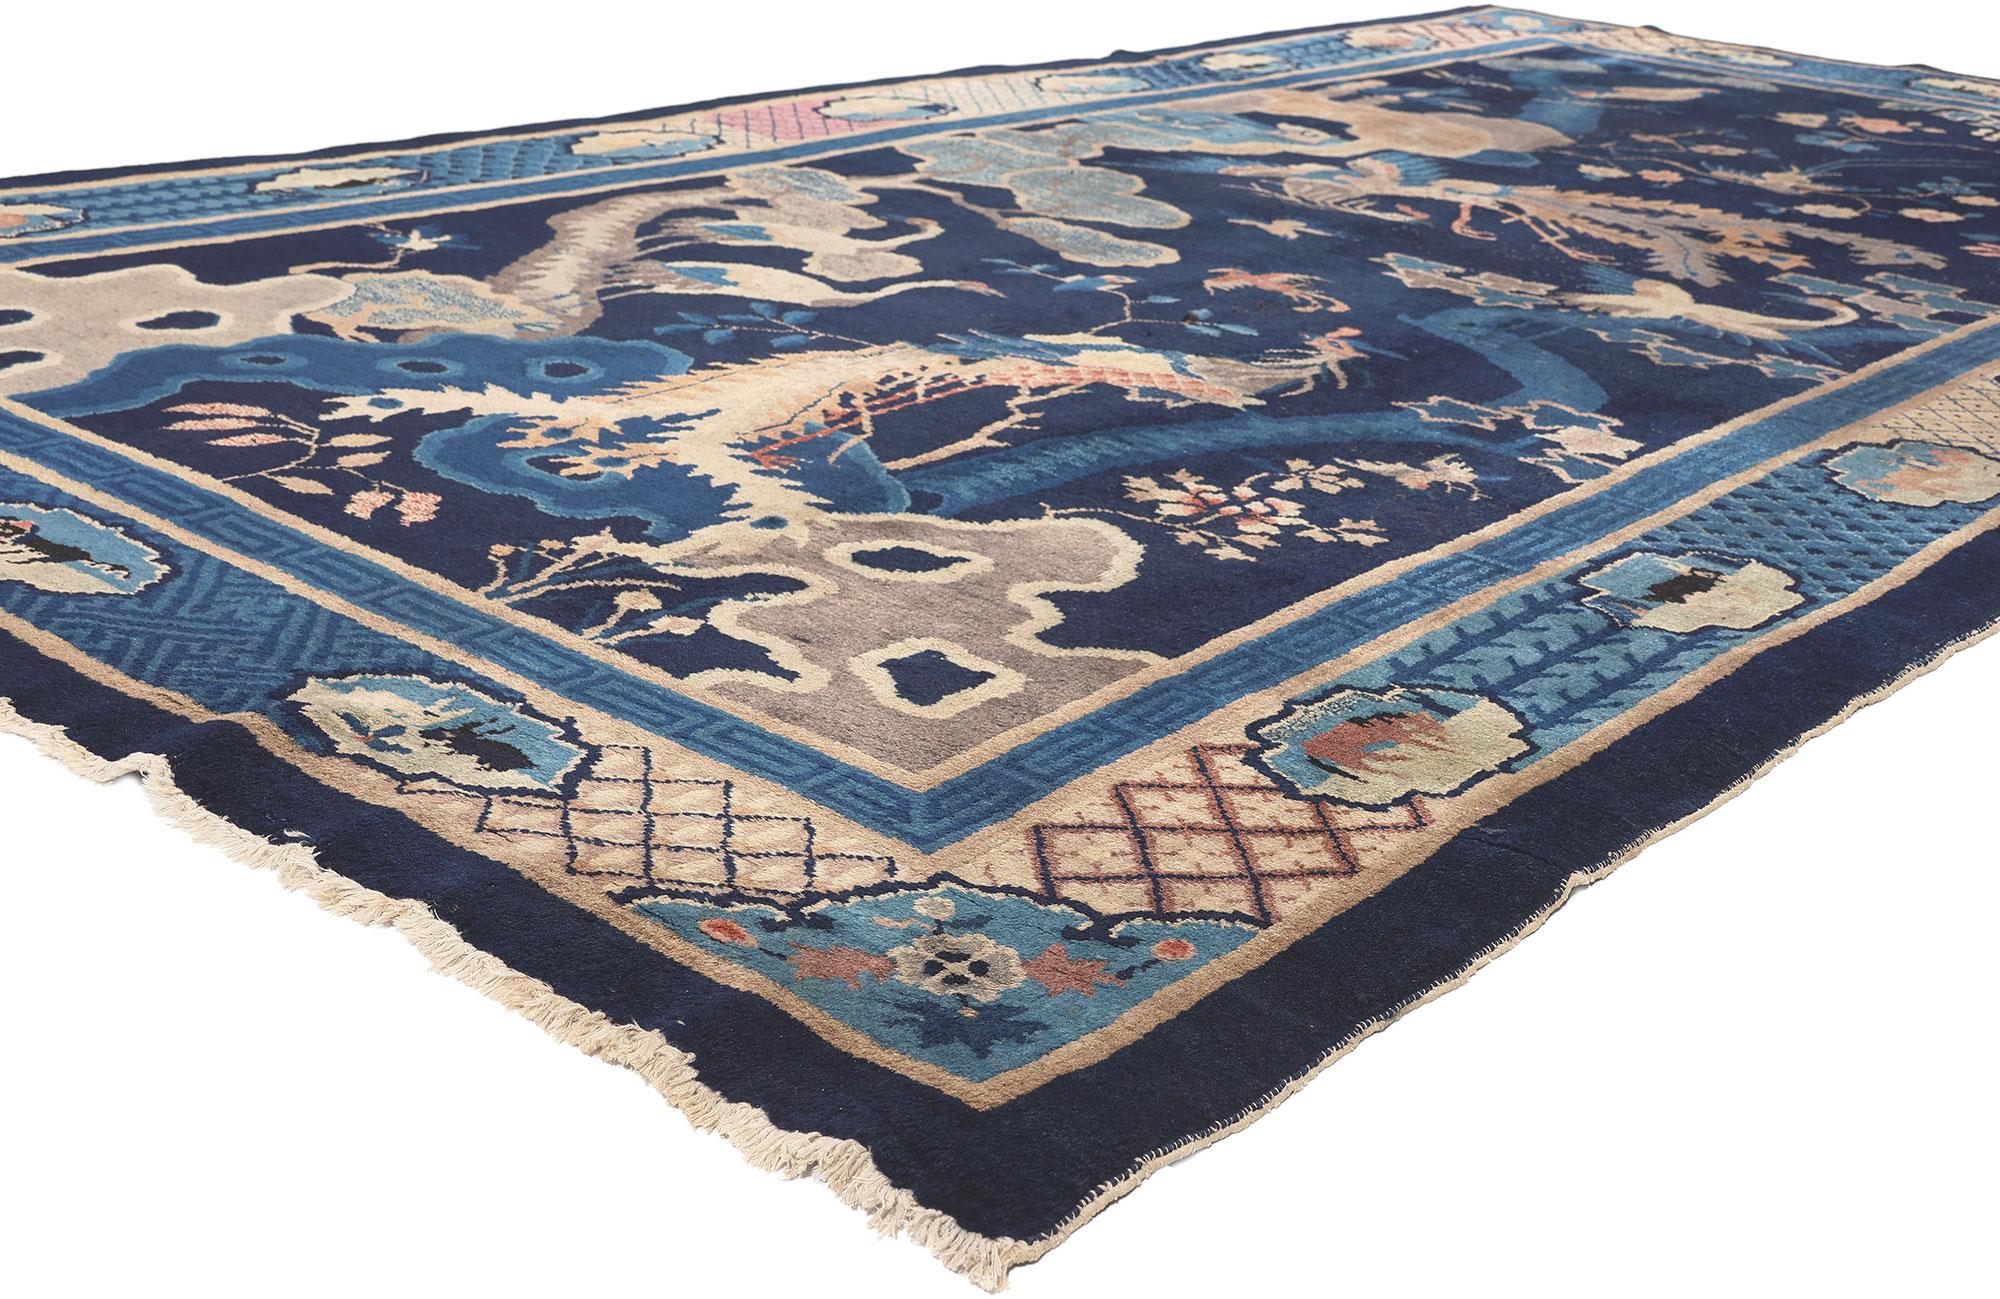 77215 Antique Chinese Pictorial Baotou Rug Bai Niao Chao Feng Rug, 06'00 x 11'06. 
This hand knotted wool antique Chinese Baotou rug features a pictorial landscape scene with a variety of birds and botanical motifs spread across an abrashed navy